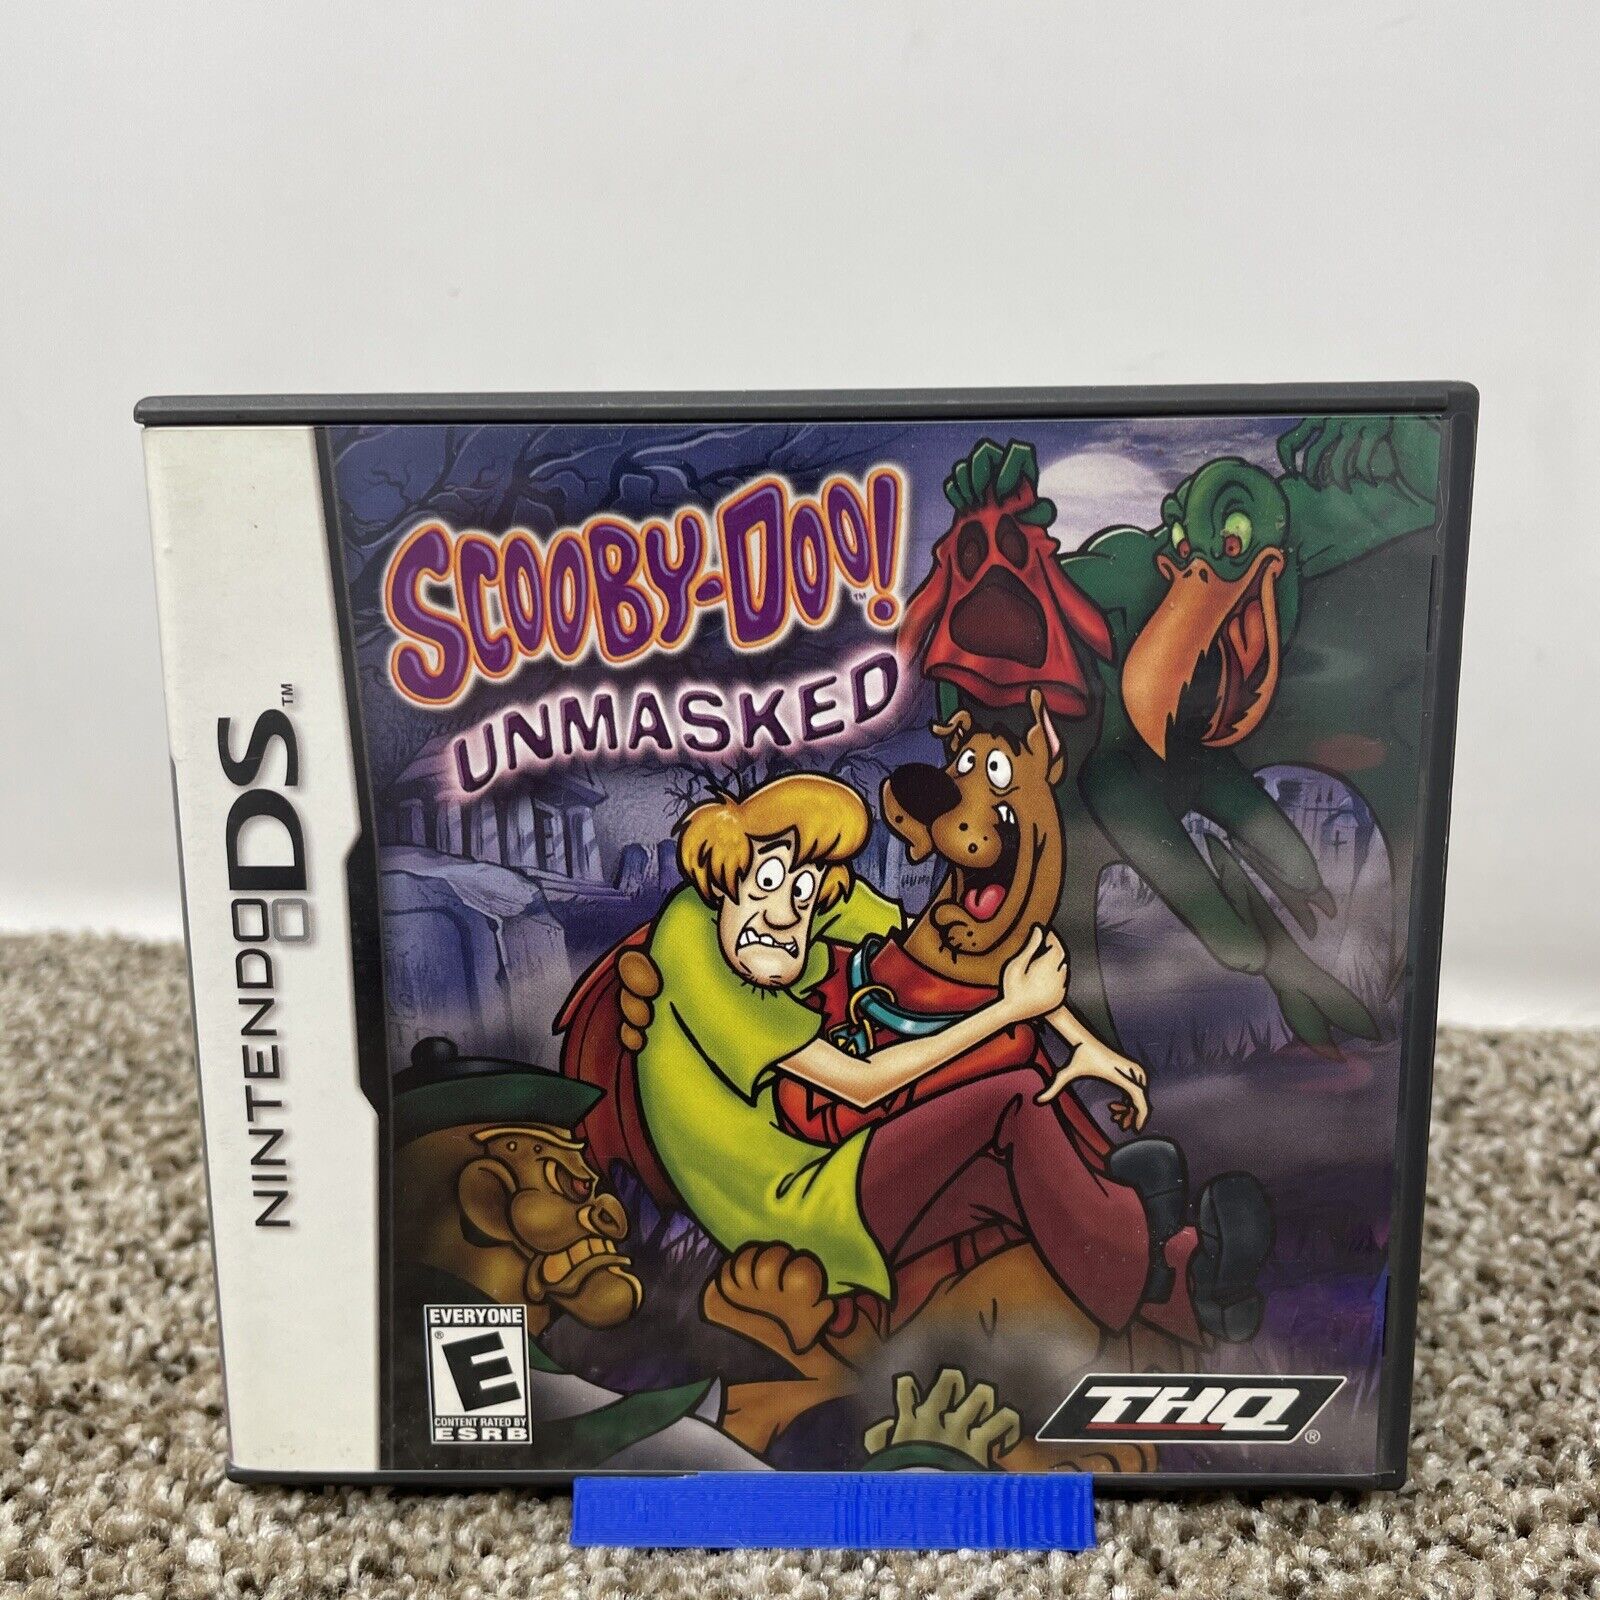 Scooby-Doo Unmasked (Nintendo DS, 2004) CIB w/ Manual Authentic Tested